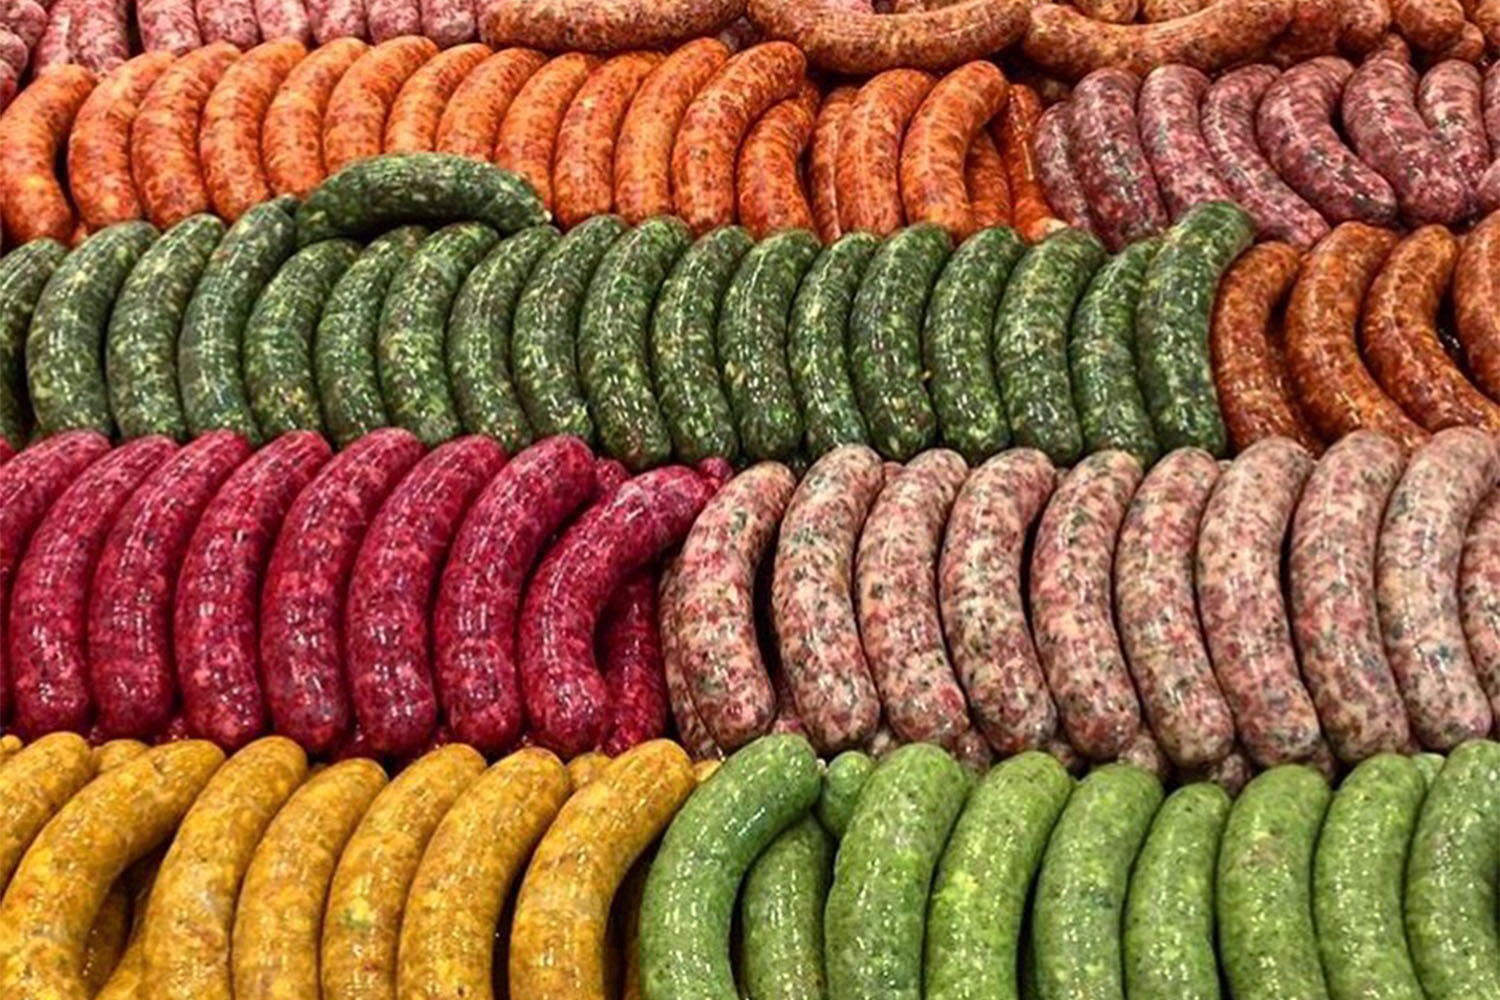 Seemore's stuffed sausages are filled with fresh vegetables